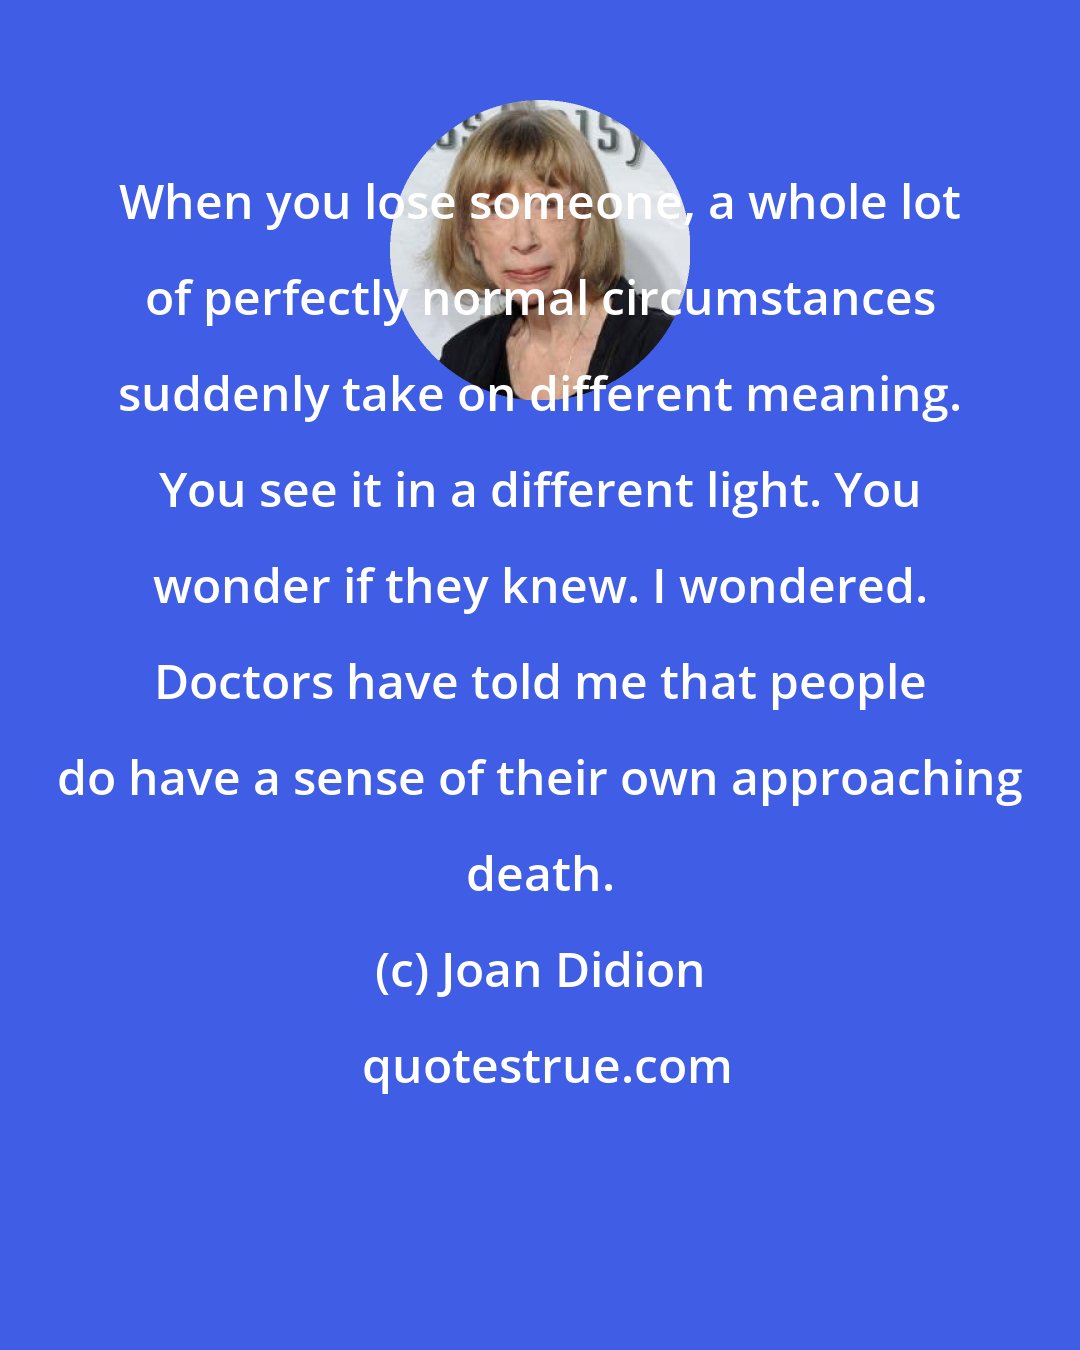 Joan Didion: When you lose someone, a whole lot of perfectly normal circumstances suddenly take on different meaning. You see it in a different light. You wonder if they knew. I wondered. Doctors have told me that people do have a sense of their own approaching death.